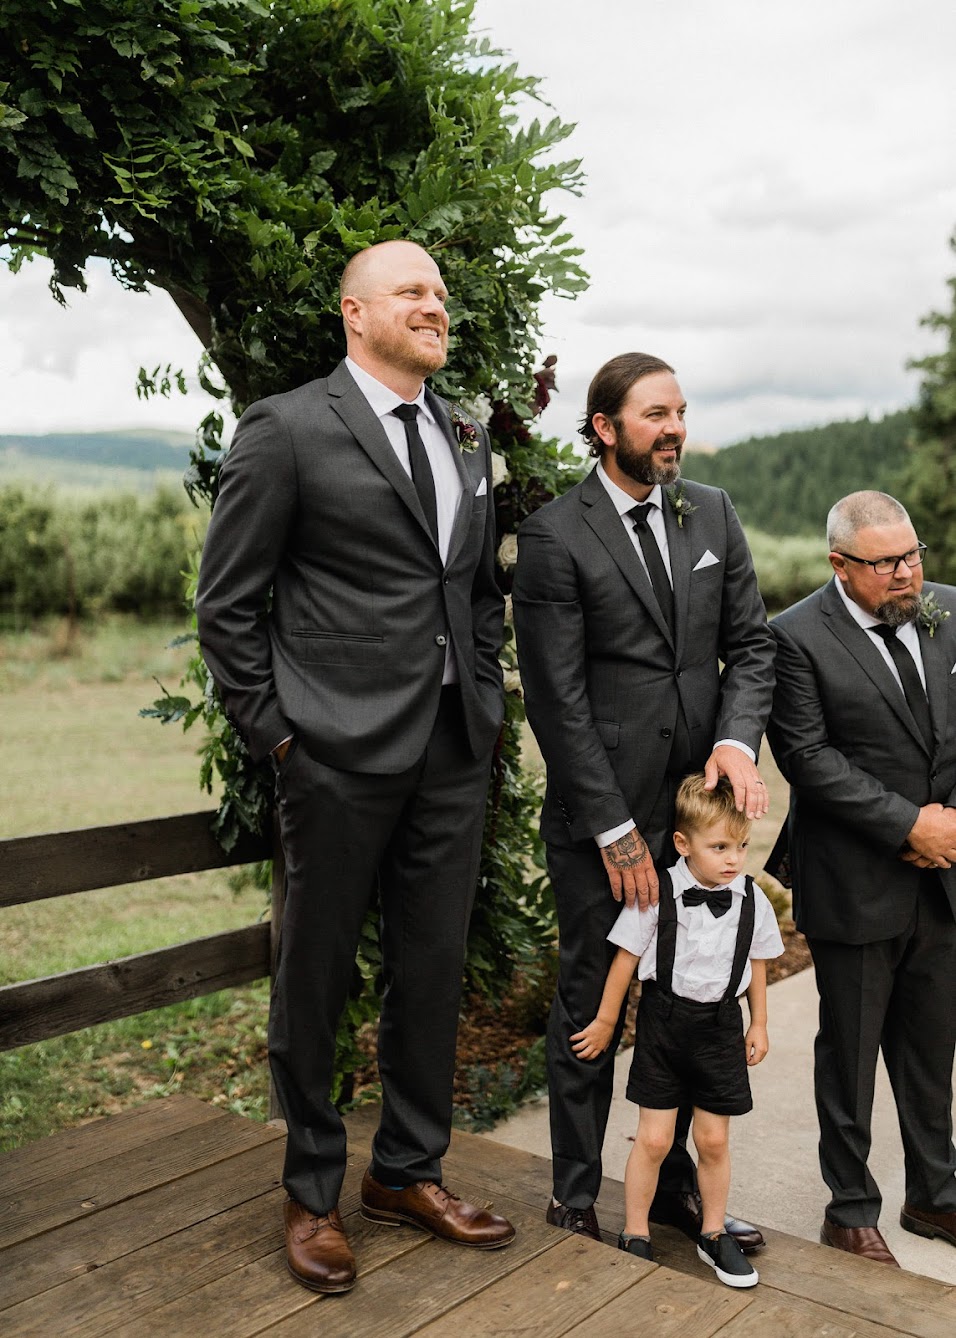 The groom and his groomsmen all smiling as they watch the bride come down the aisle.